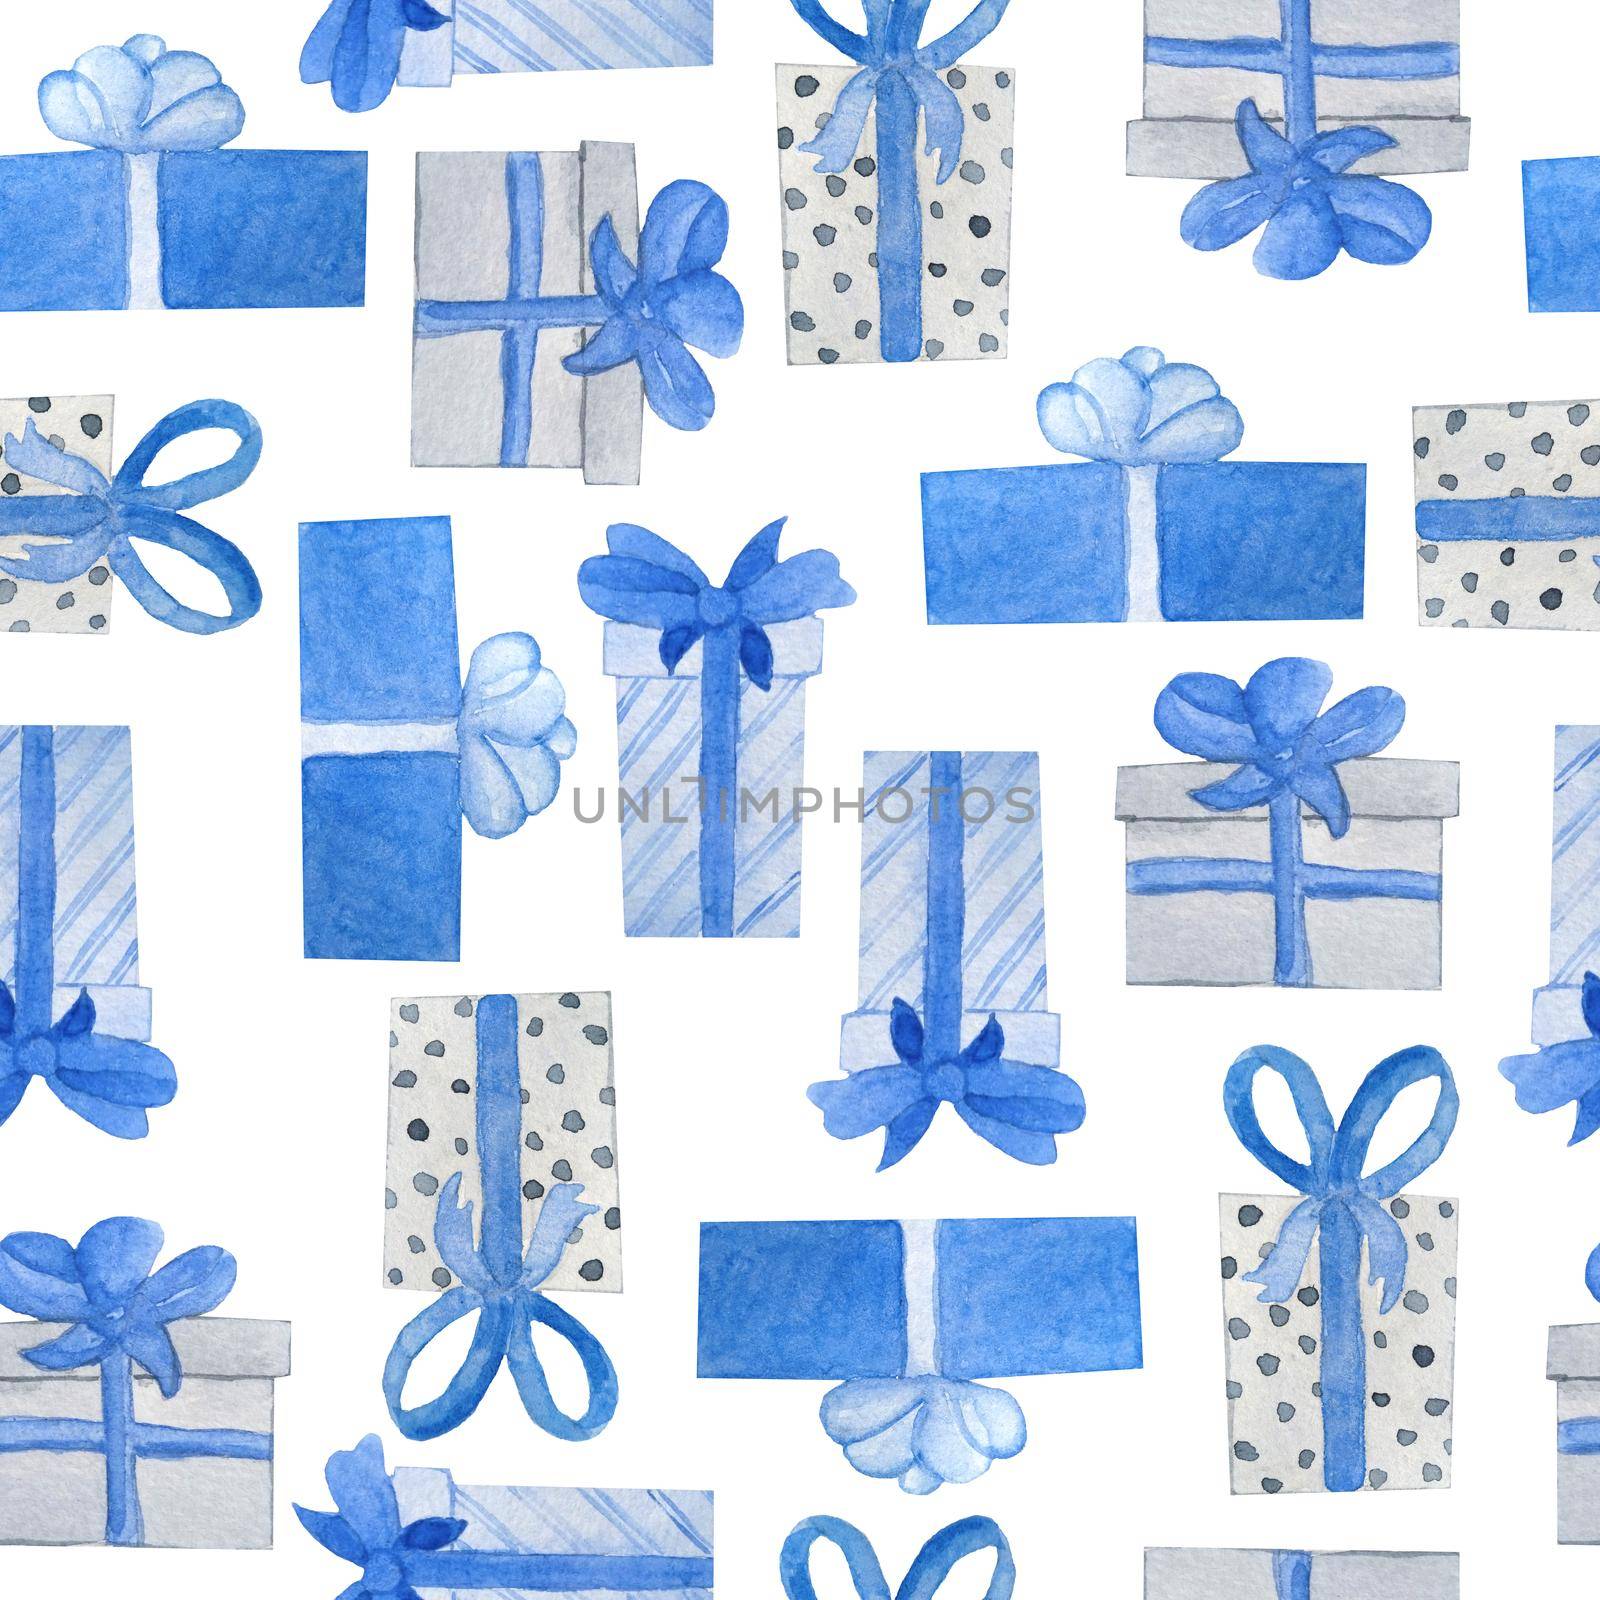 Watercolor seamless hand drawn pattern with blue grey christmas gifts in decor wrapping paper with bows. Nordic scandinavian neutral colors for new year celebration cards background. Box with shiny ribbon